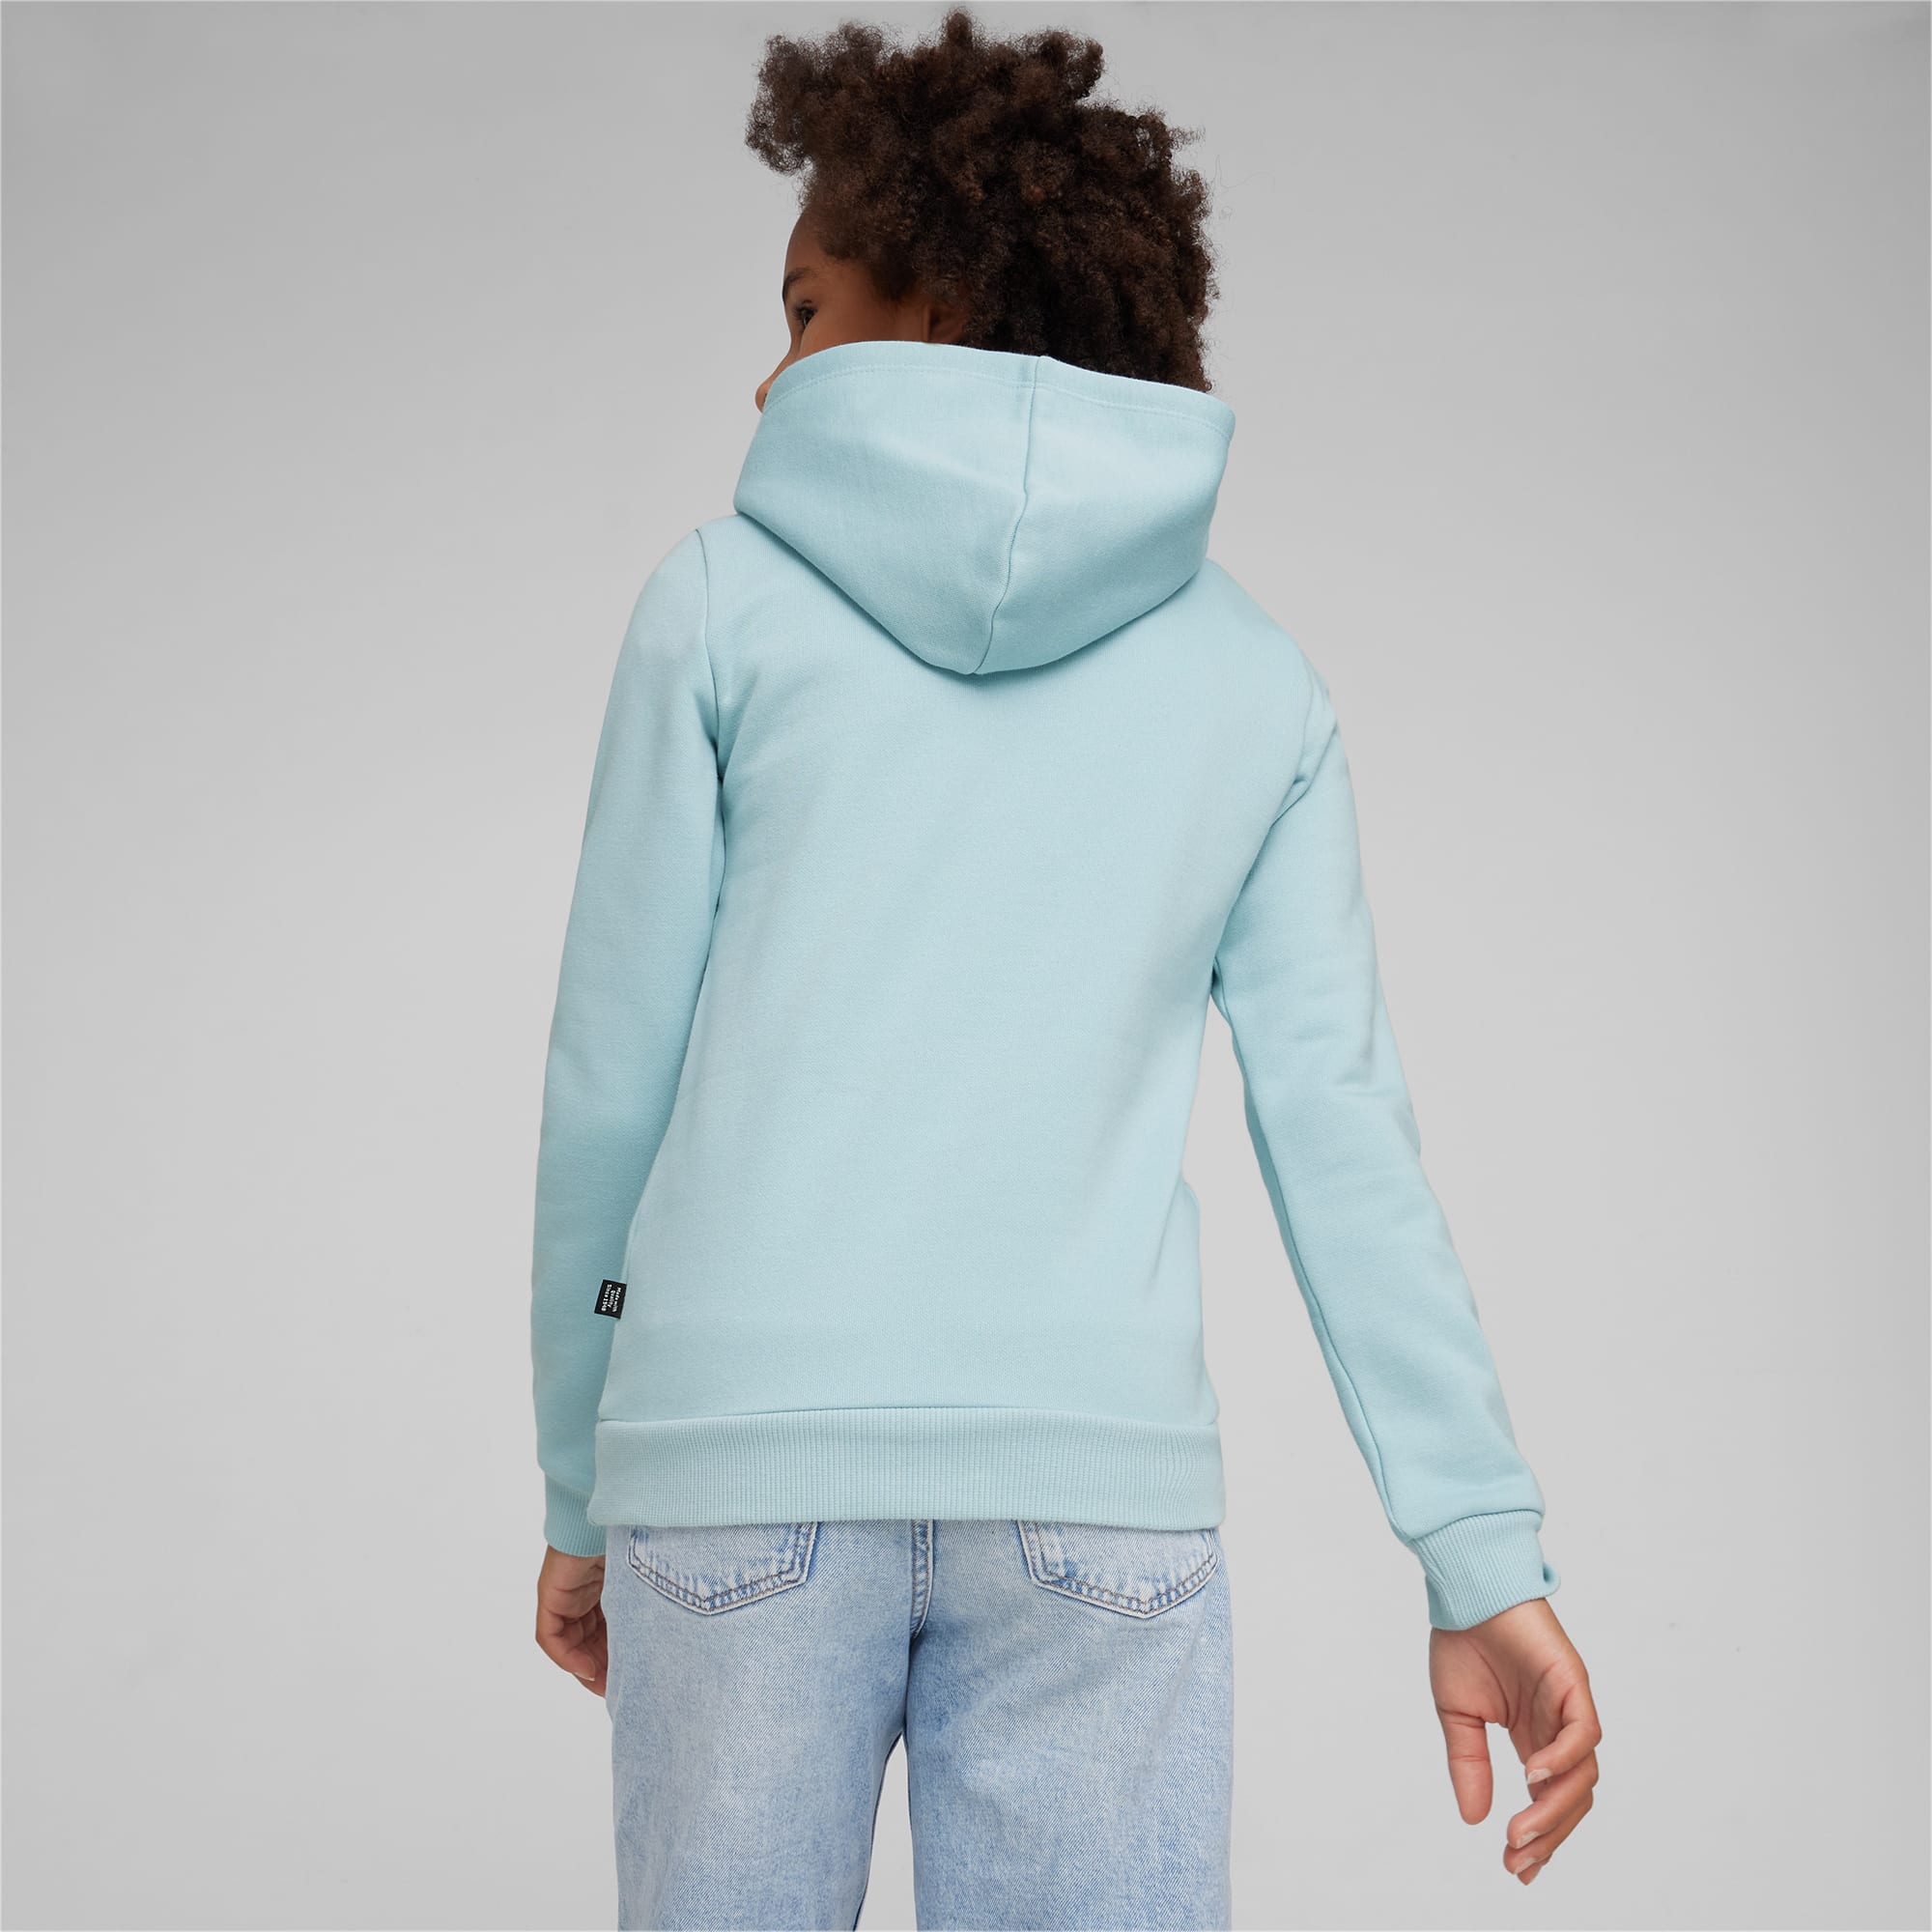 PUMA Essentials Logo Youth Hoodie, Turquoise Surf, Size 92, Clothing